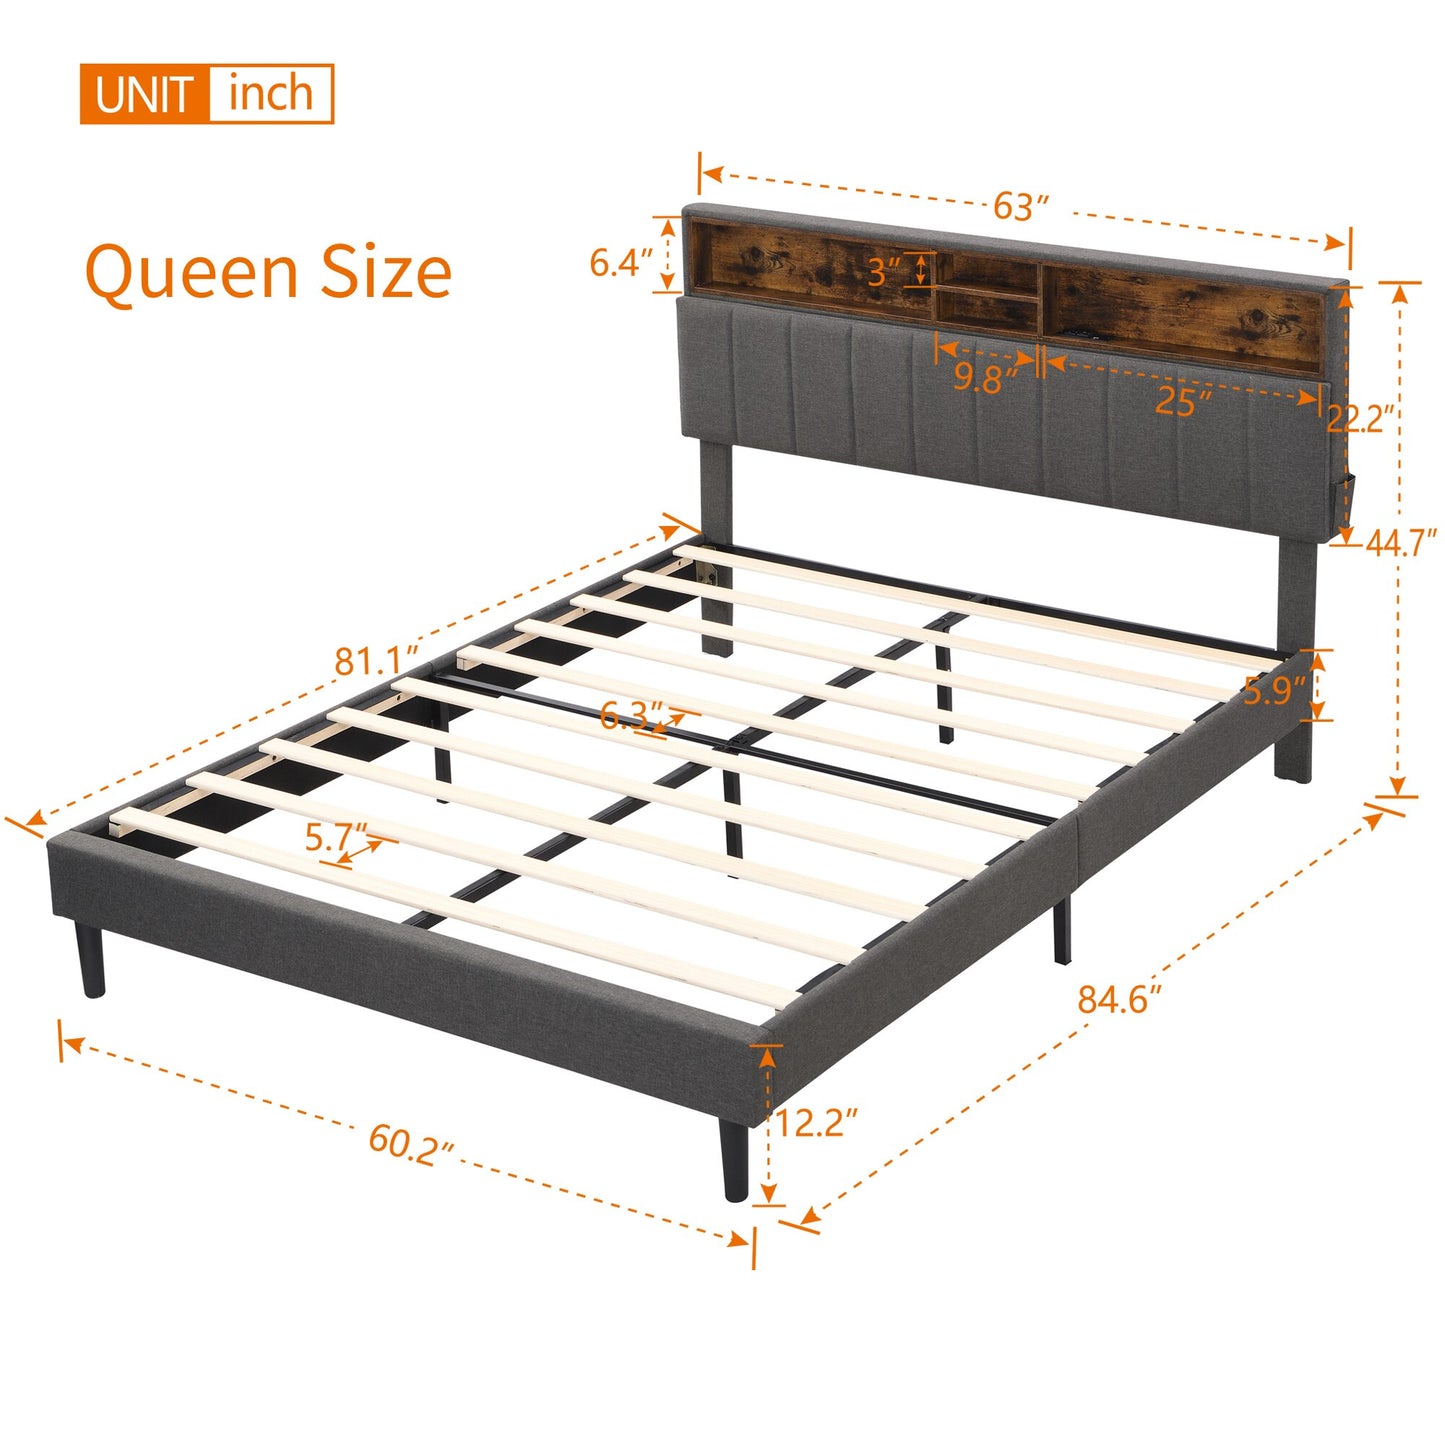 Modern Upholstered Bed with Storage and USB Port | Wood and Linen | Queen/Full Size